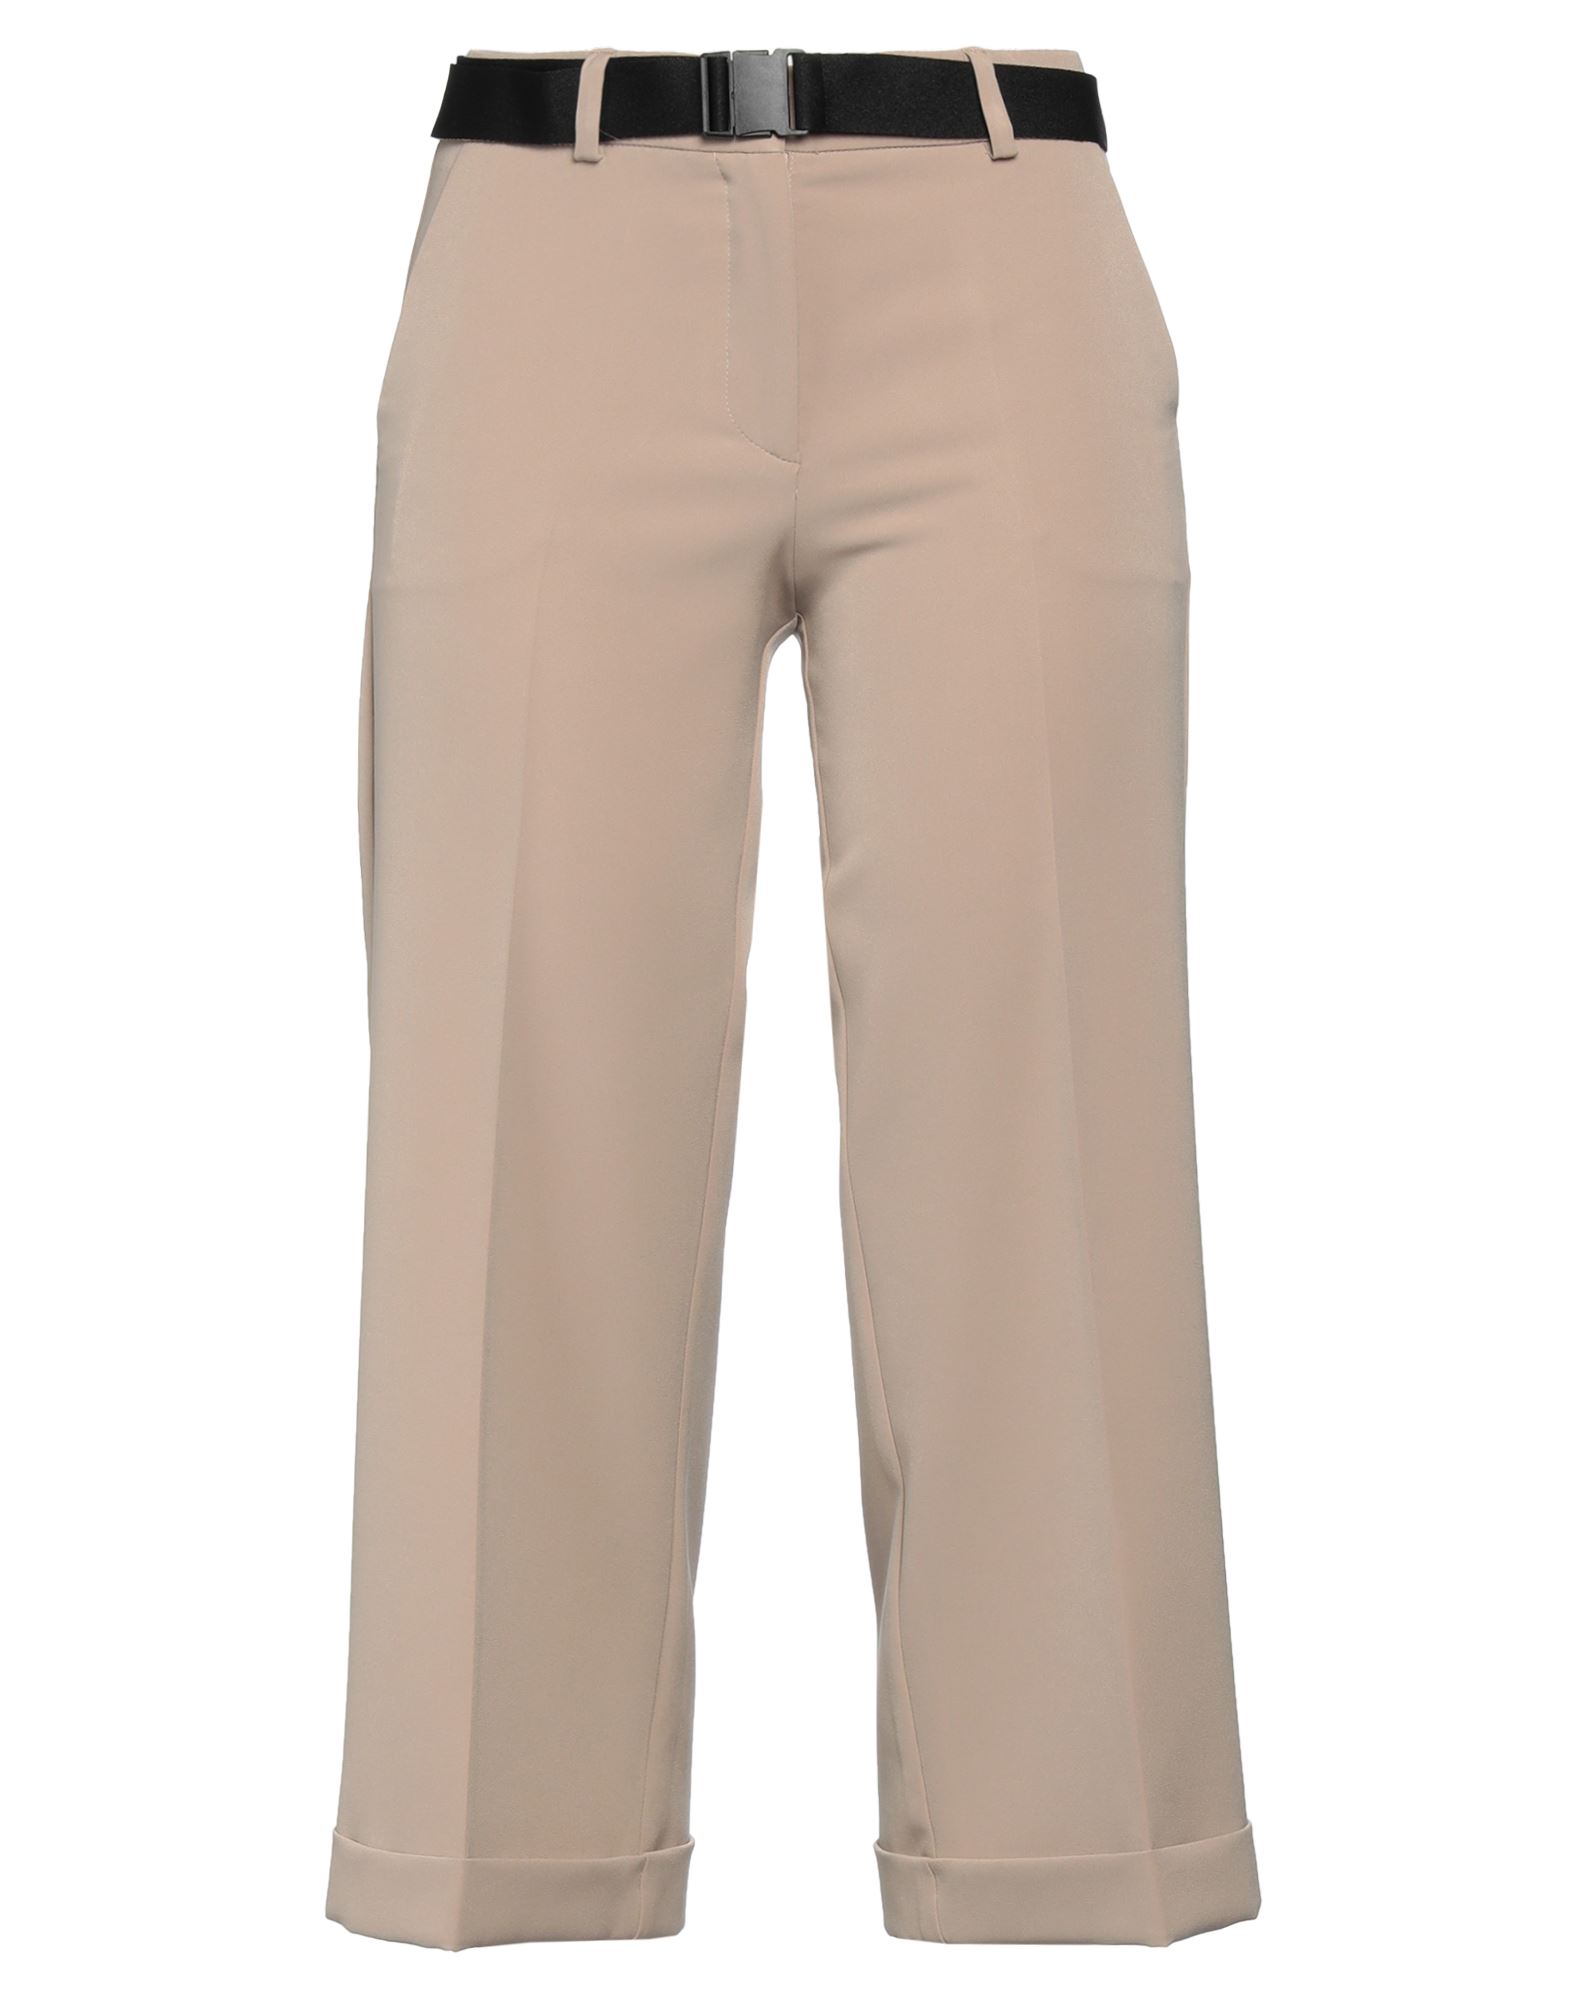 Access Fashion Cropped Pants In Beige